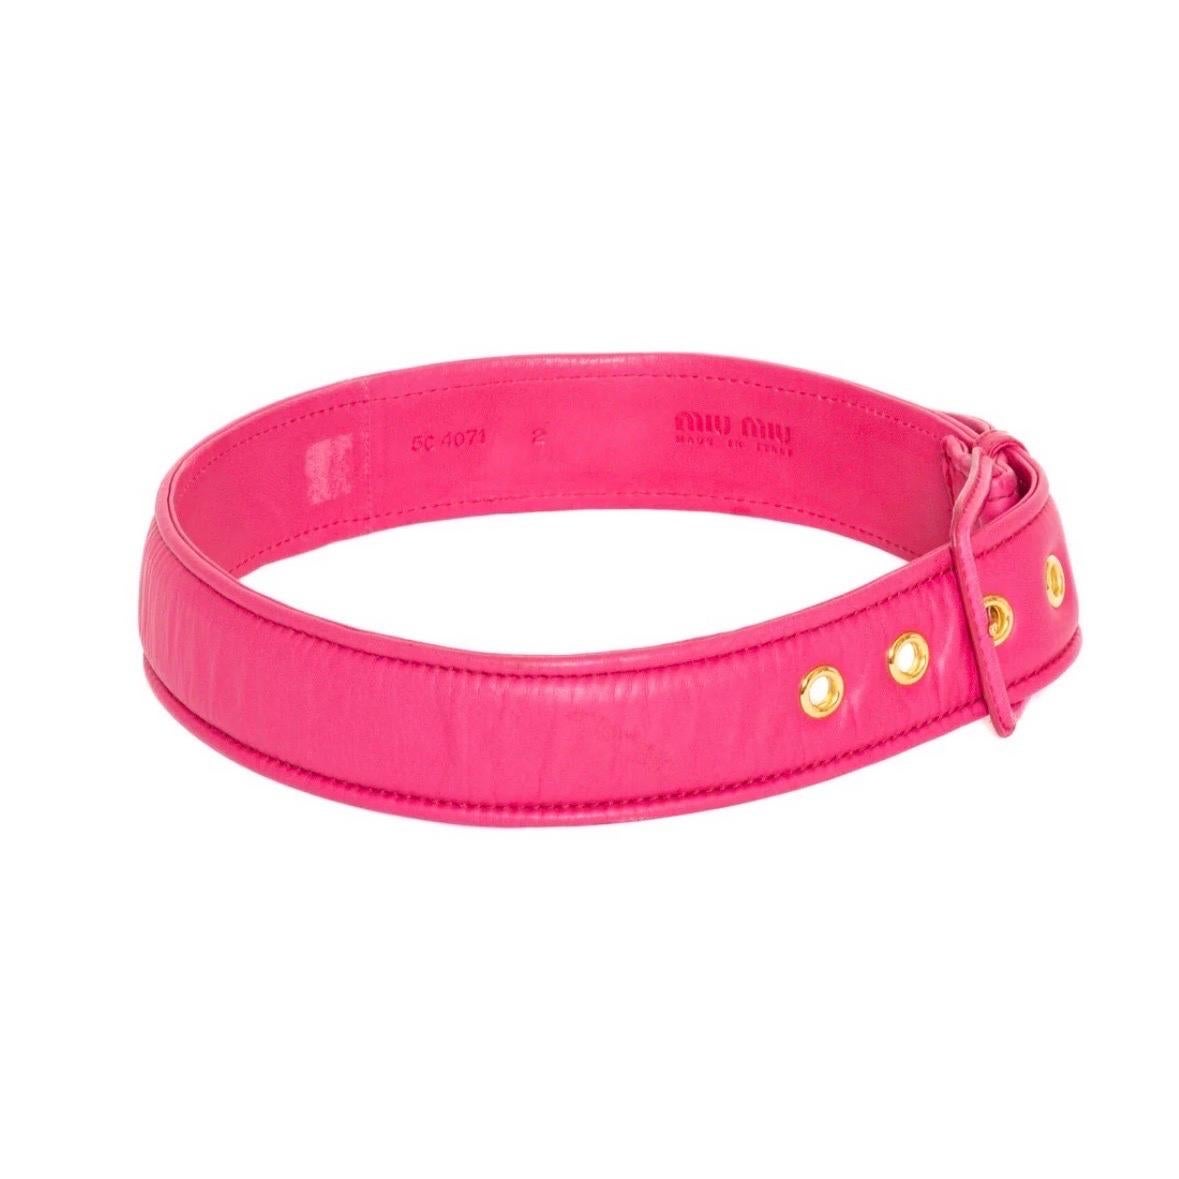 Miu Miu Pink Leather Padded Belt

Pink/Magenta
Padded
Gold-tone hardware
Five holes
Square leather buckle
Leather
Made in Italy
Great pre-owned condition; minimal signs of wear
Area on inner side with minor abrasion
Size & Measurements
Approximate,